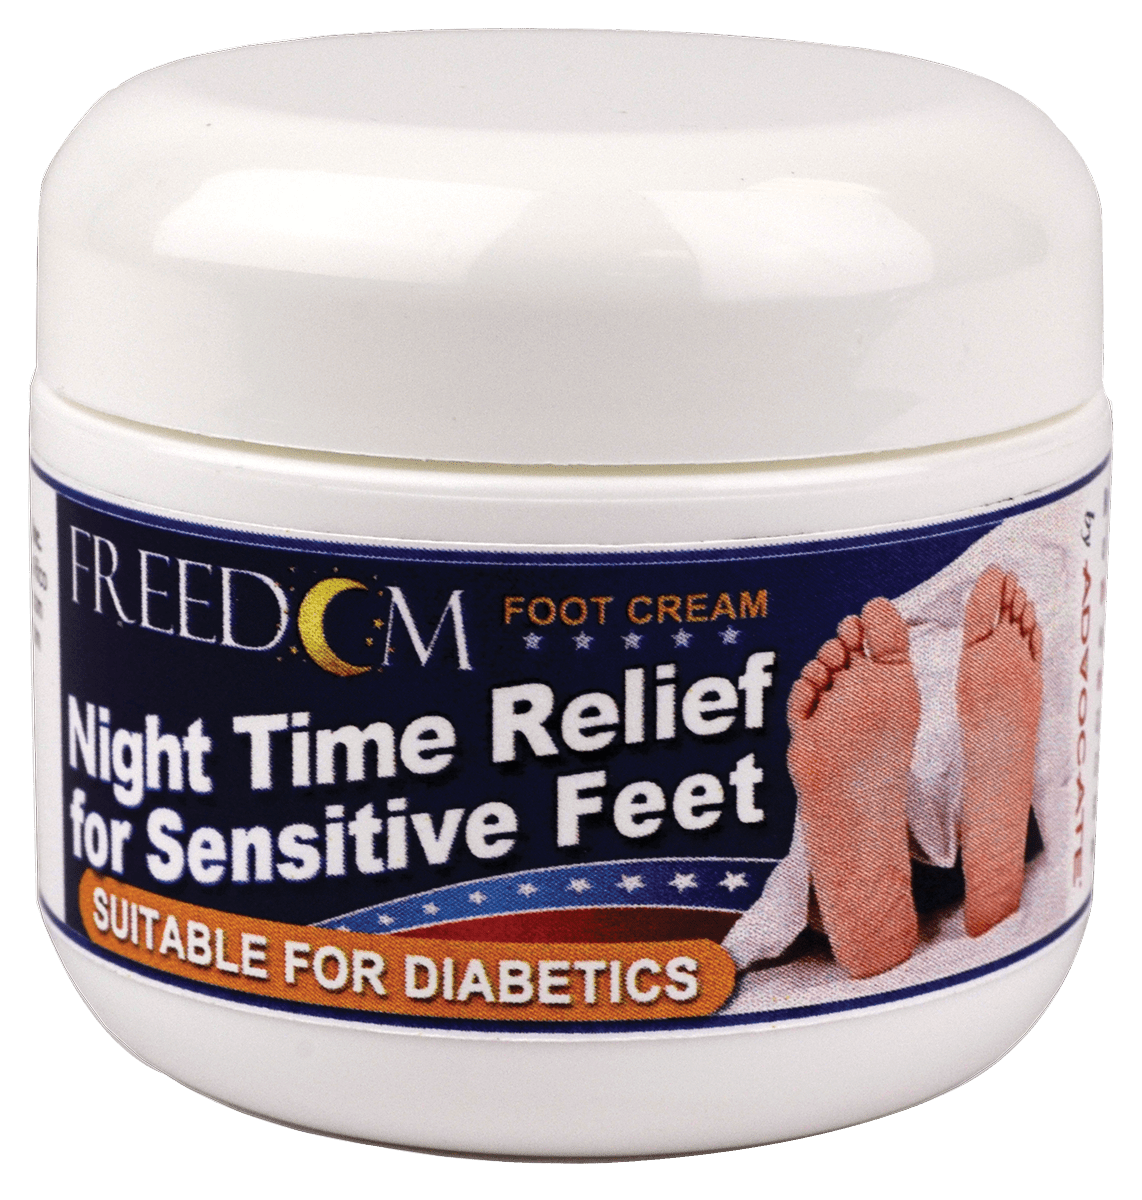 EA/1 - Pharma Supply Freedom Night Time Foot Cream 2 oz Tub, Night Time Relief for Sensitive Feet - Best Buy Medical Supplies